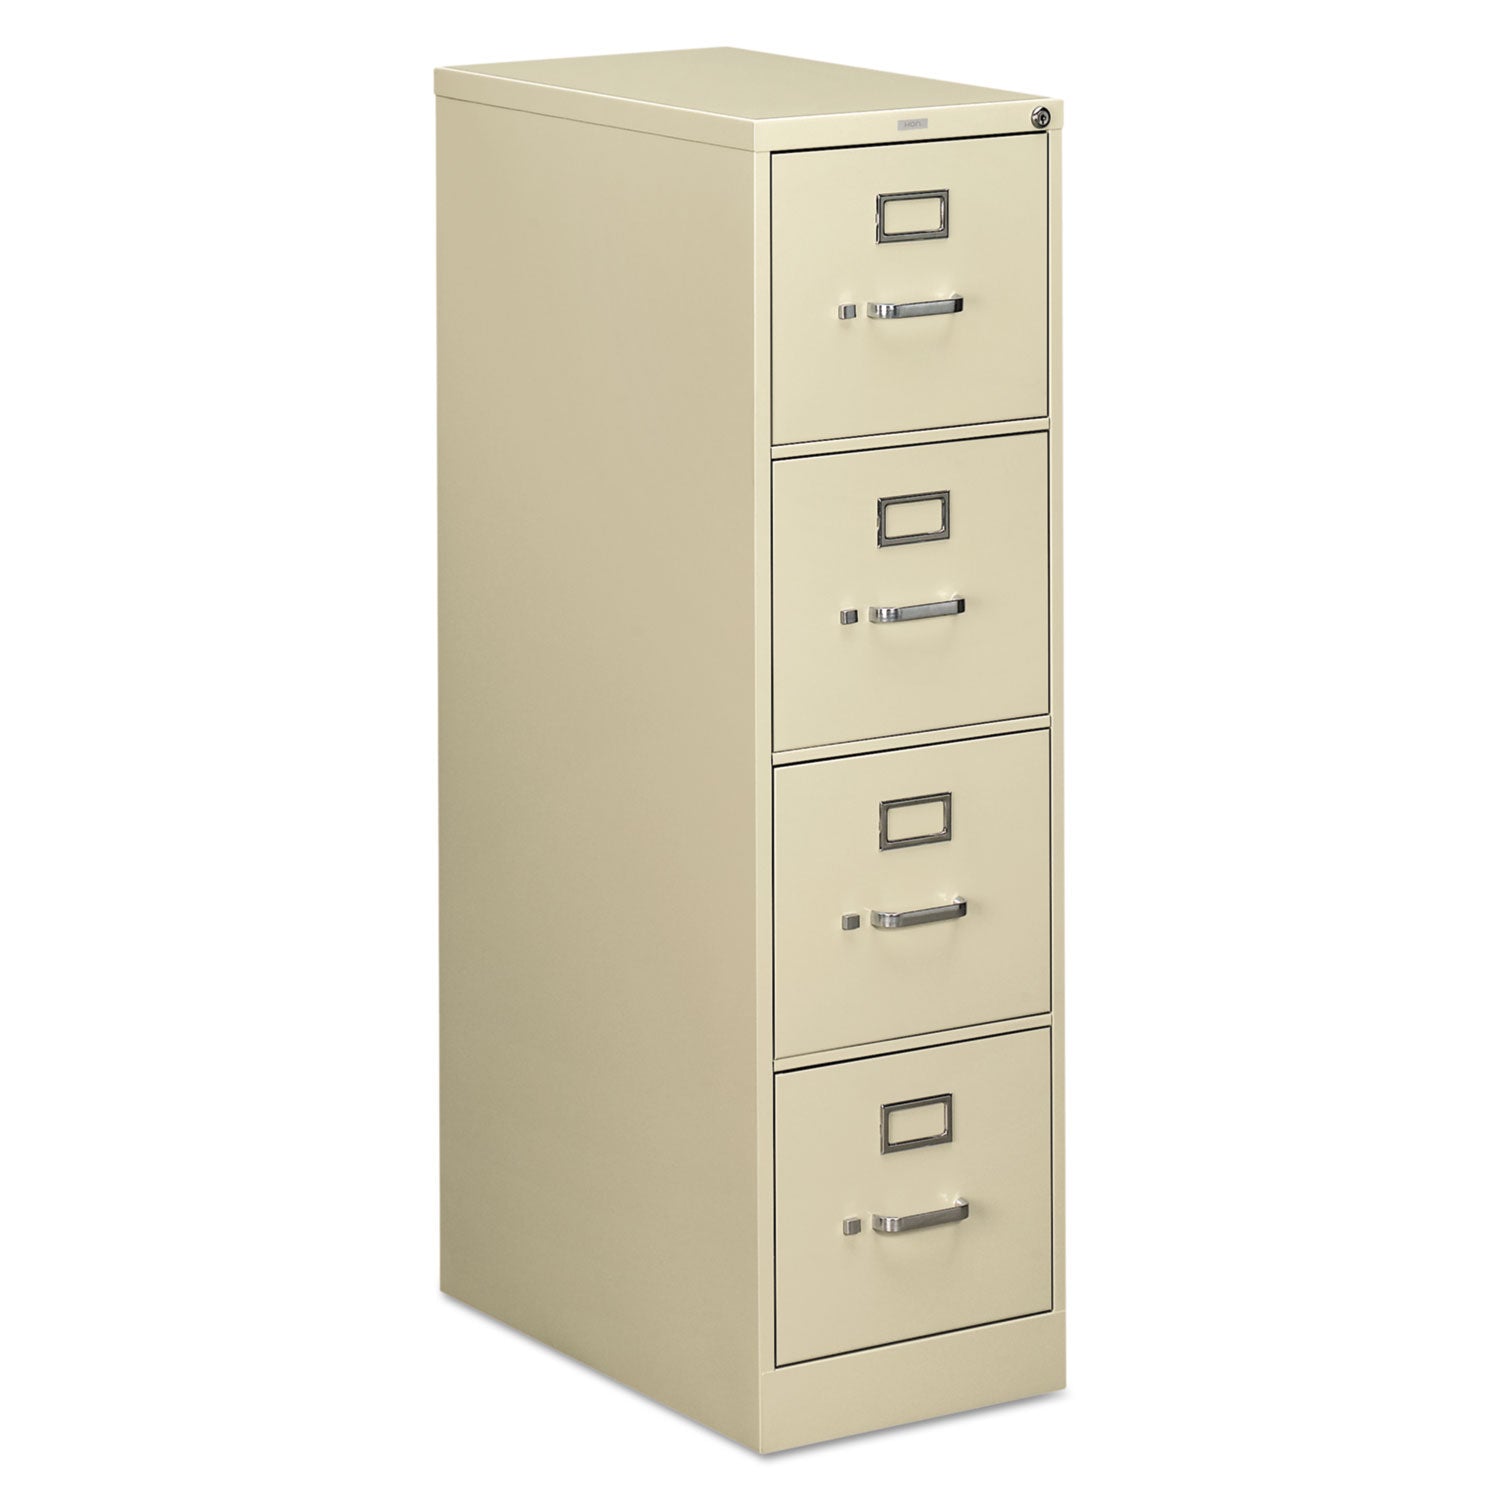 510 Series Vertical File, 4 Letter-Size File Drawers, Putty, 15" x 25" x 52 - 